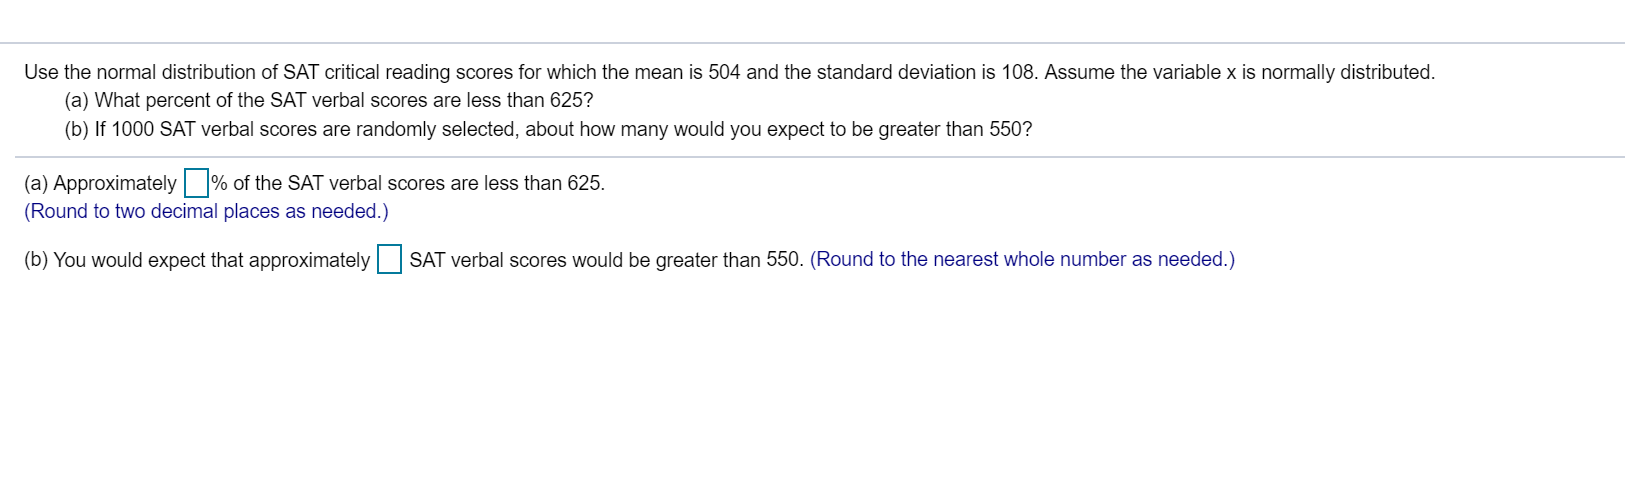 Use the normal distribution of SAT critical reading scores for which the mean is 504 and the standard deviation is 108. Assume the variable x is normally distributed.
(a) What percent of the SAT verbal scores are less than 625?
(b) If 1000 SAT verbal scores are randomly selected, about how many would you expect to be greater than 550?
